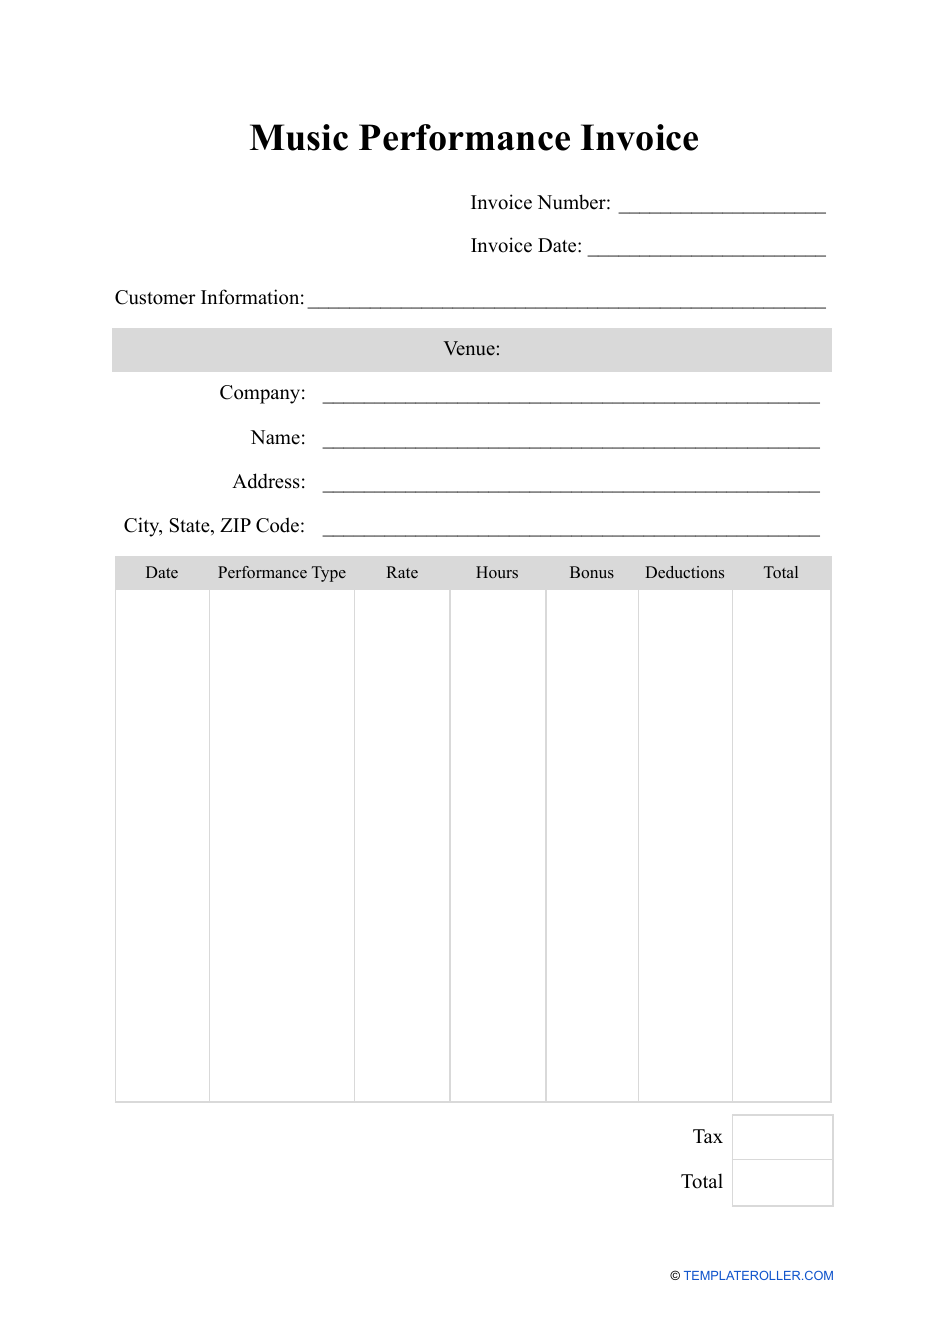 Music Performance Invoice Template Download Printable PDF Templateroller